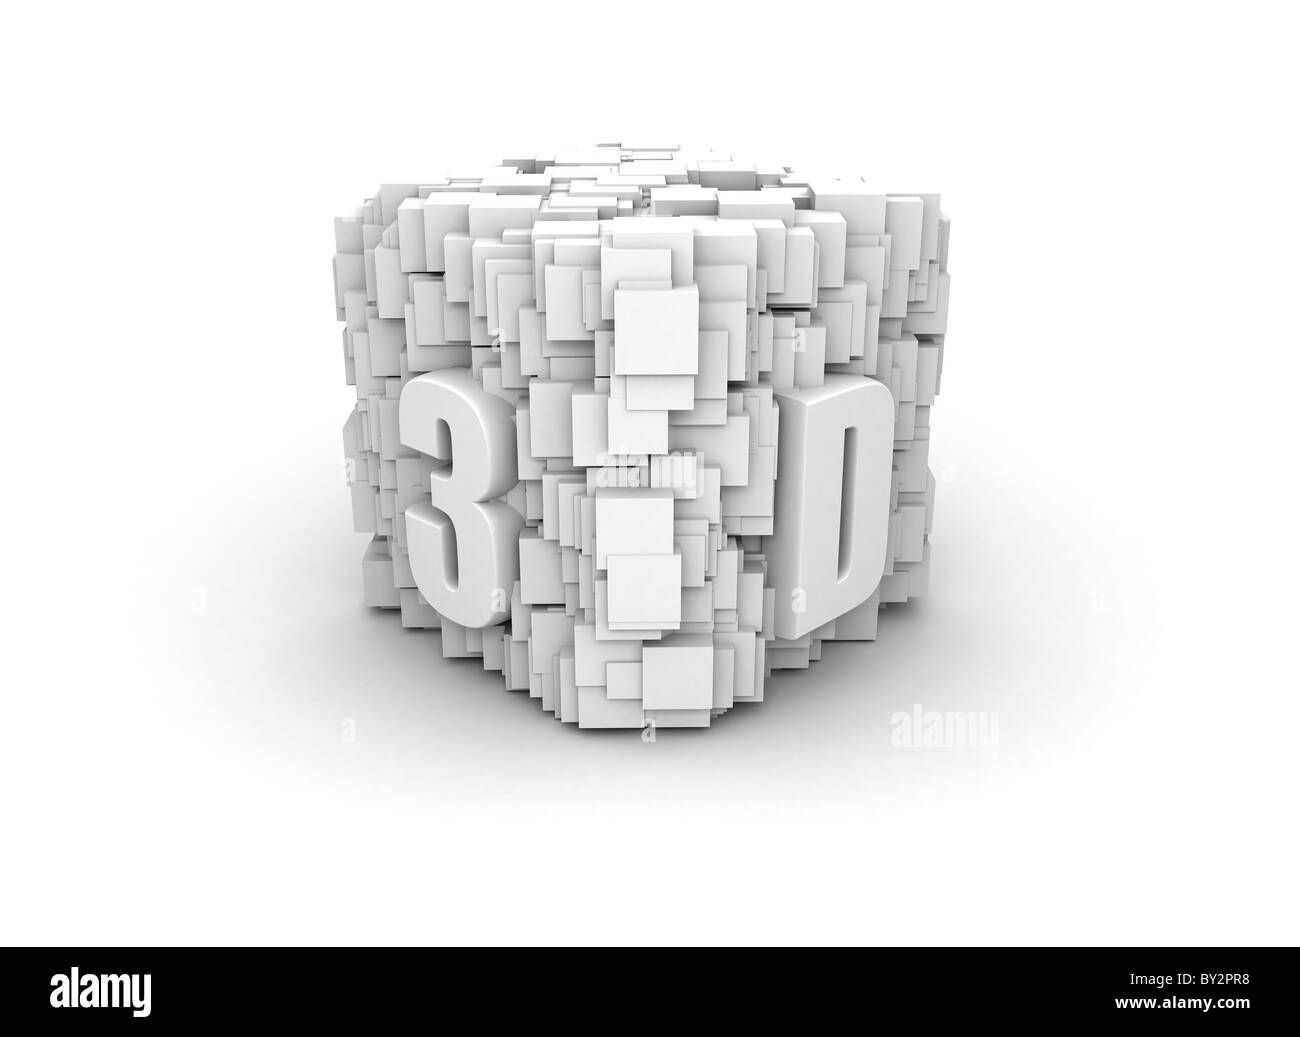 3D printed on many abstract cubes Stock Photo